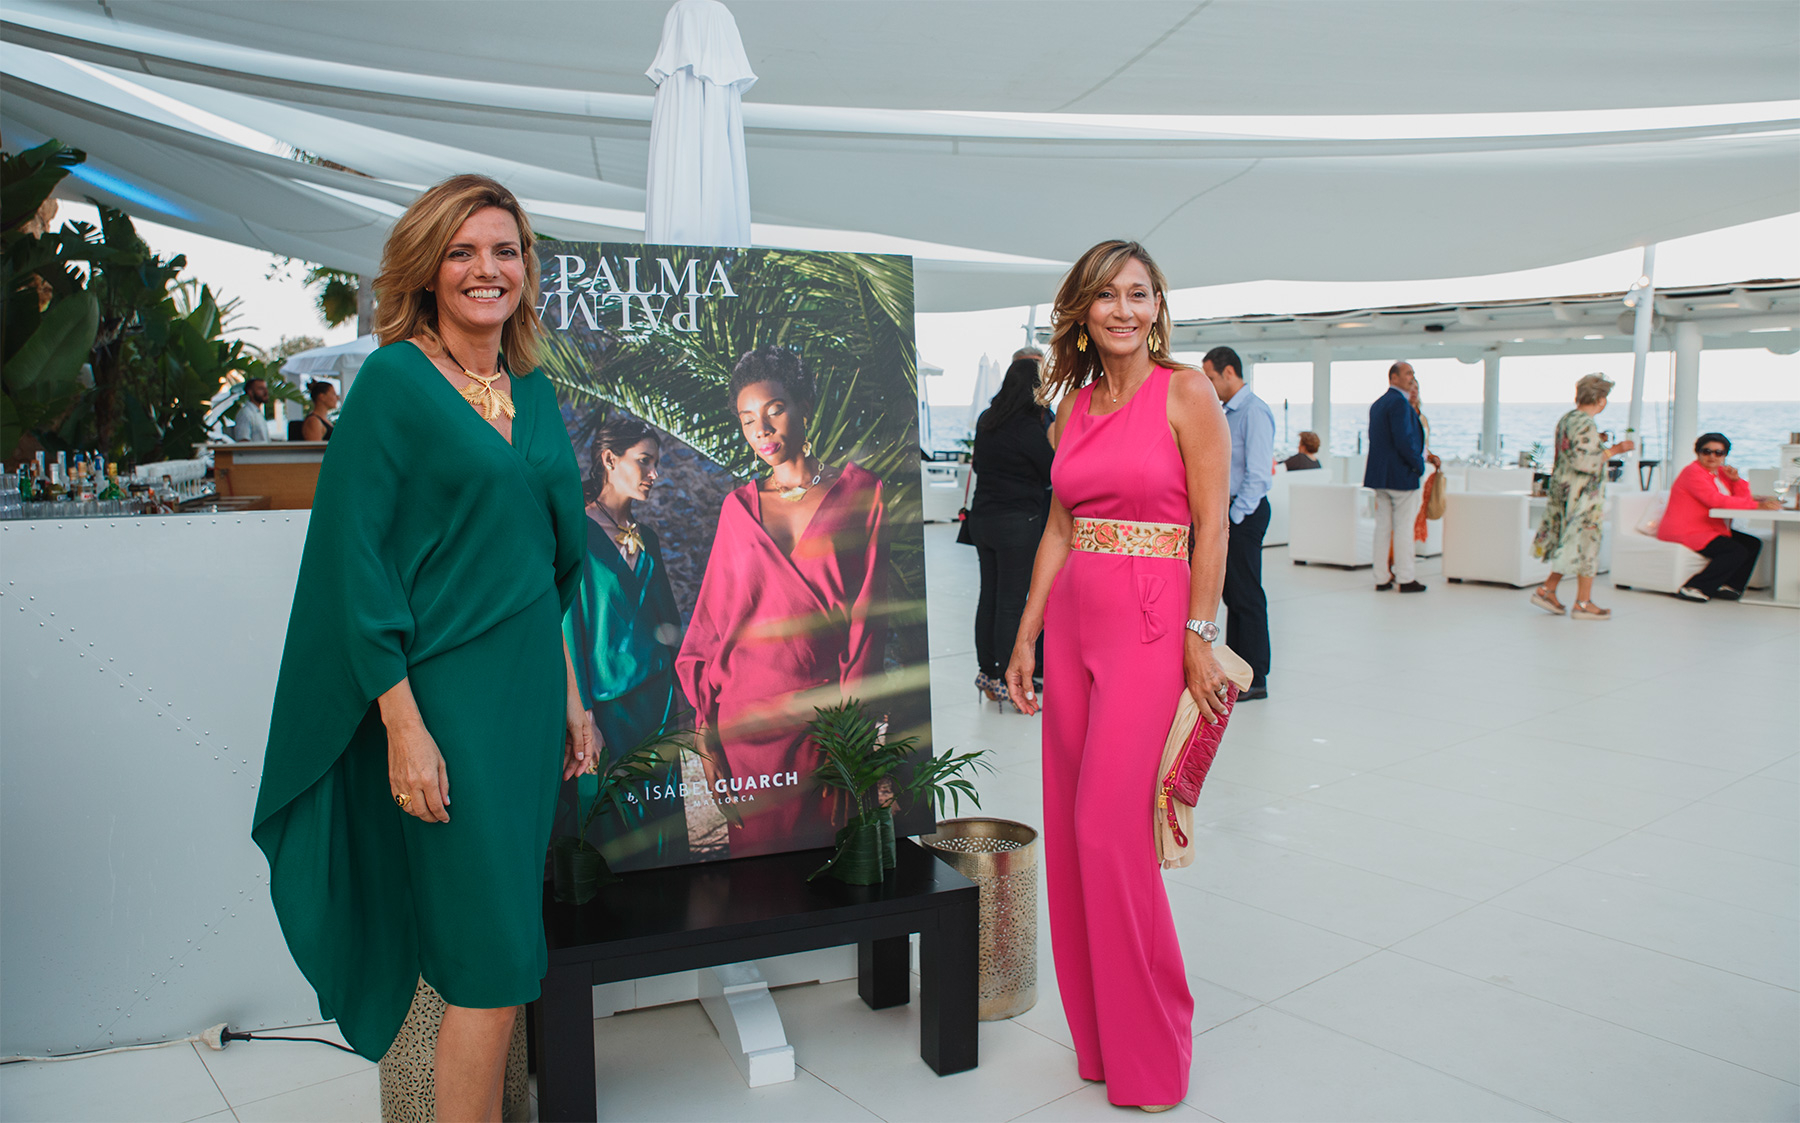 The #Palma collection event.